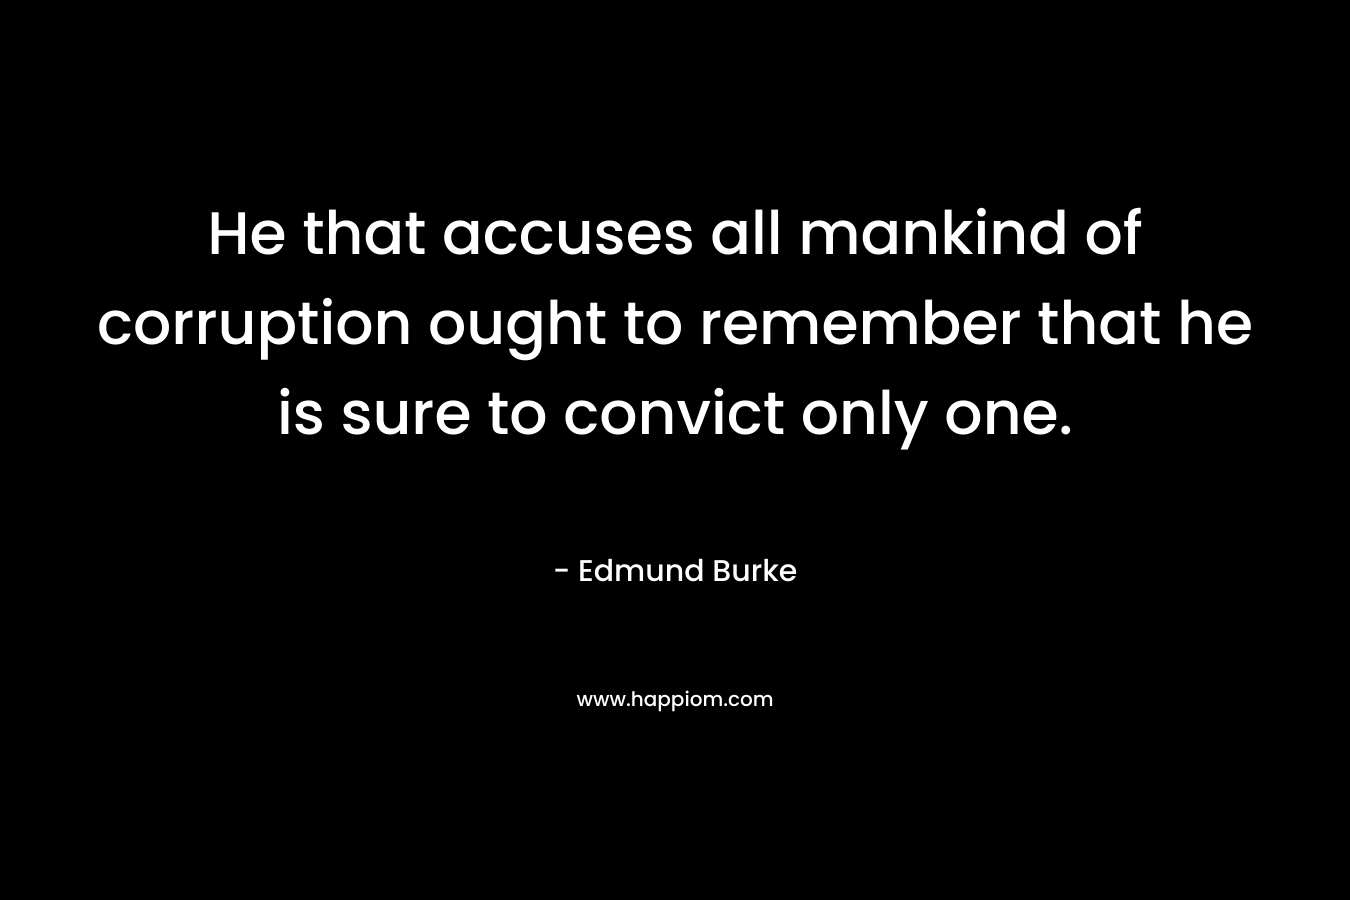 He that accuses all mankind of corruption ought to remember that he is sure to convict only one.